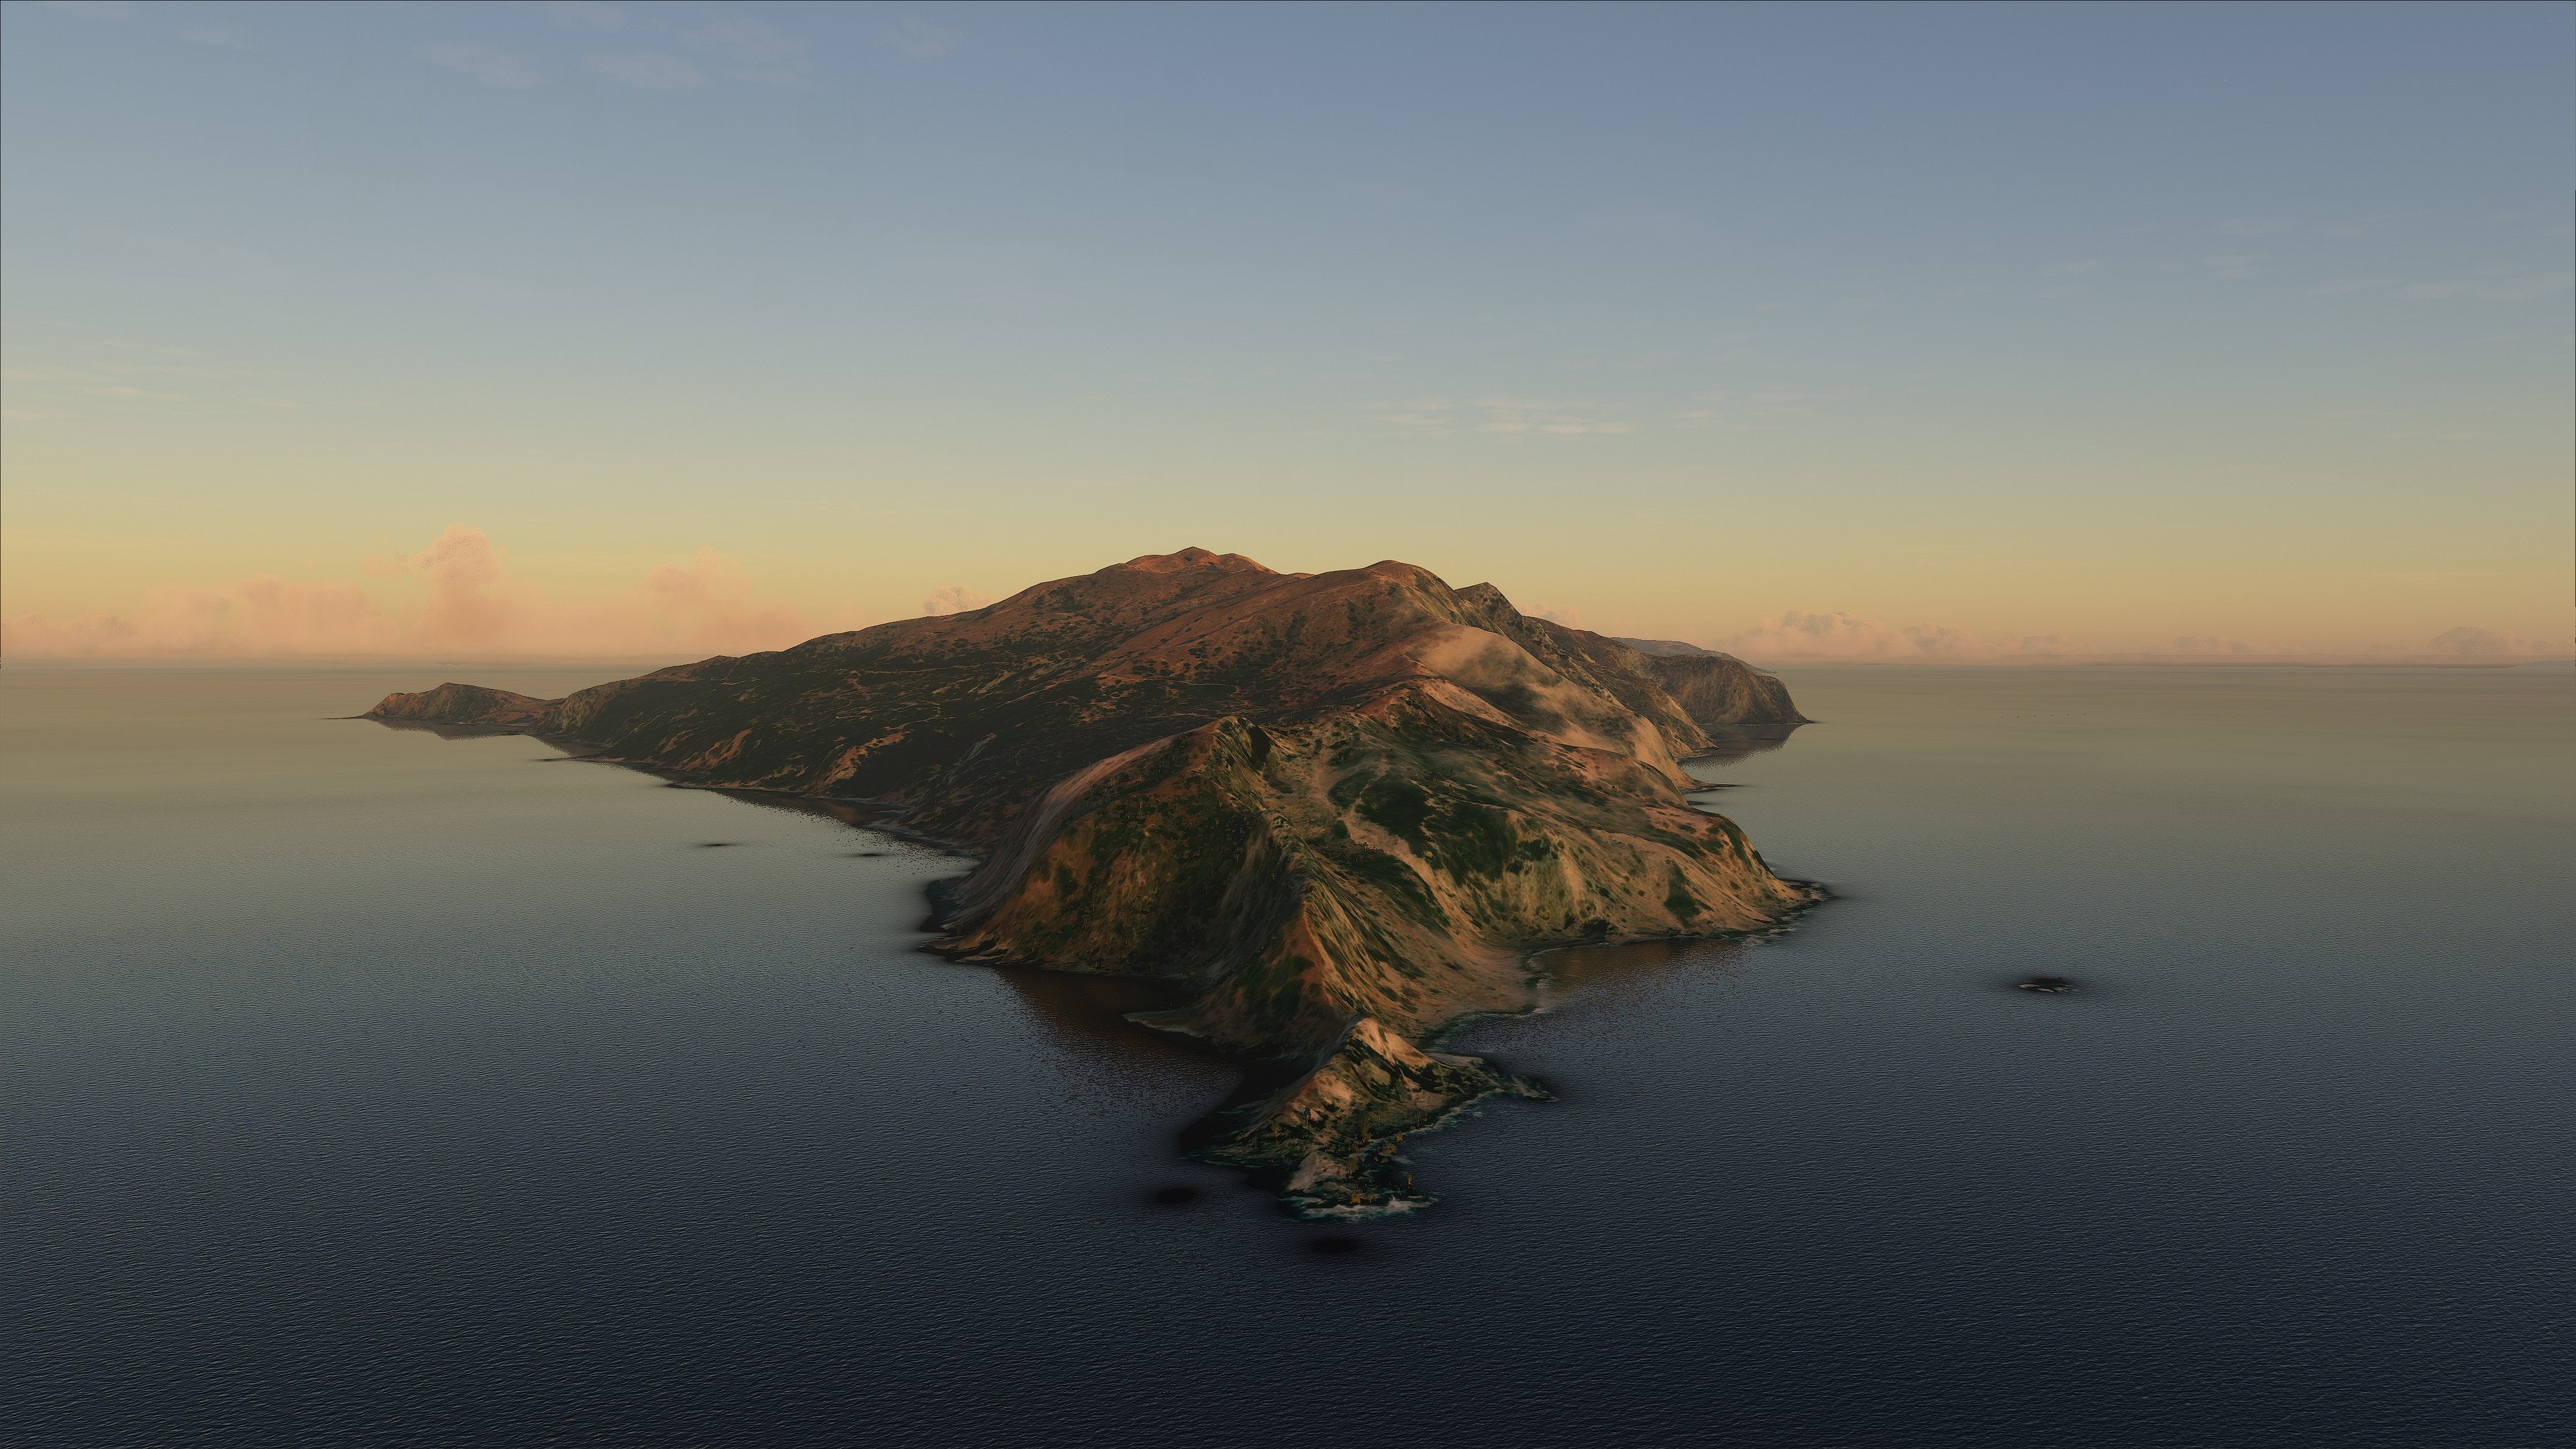 Flew to Catalina in FS2020 to recreate the Catalina wallpaper.: MacOS